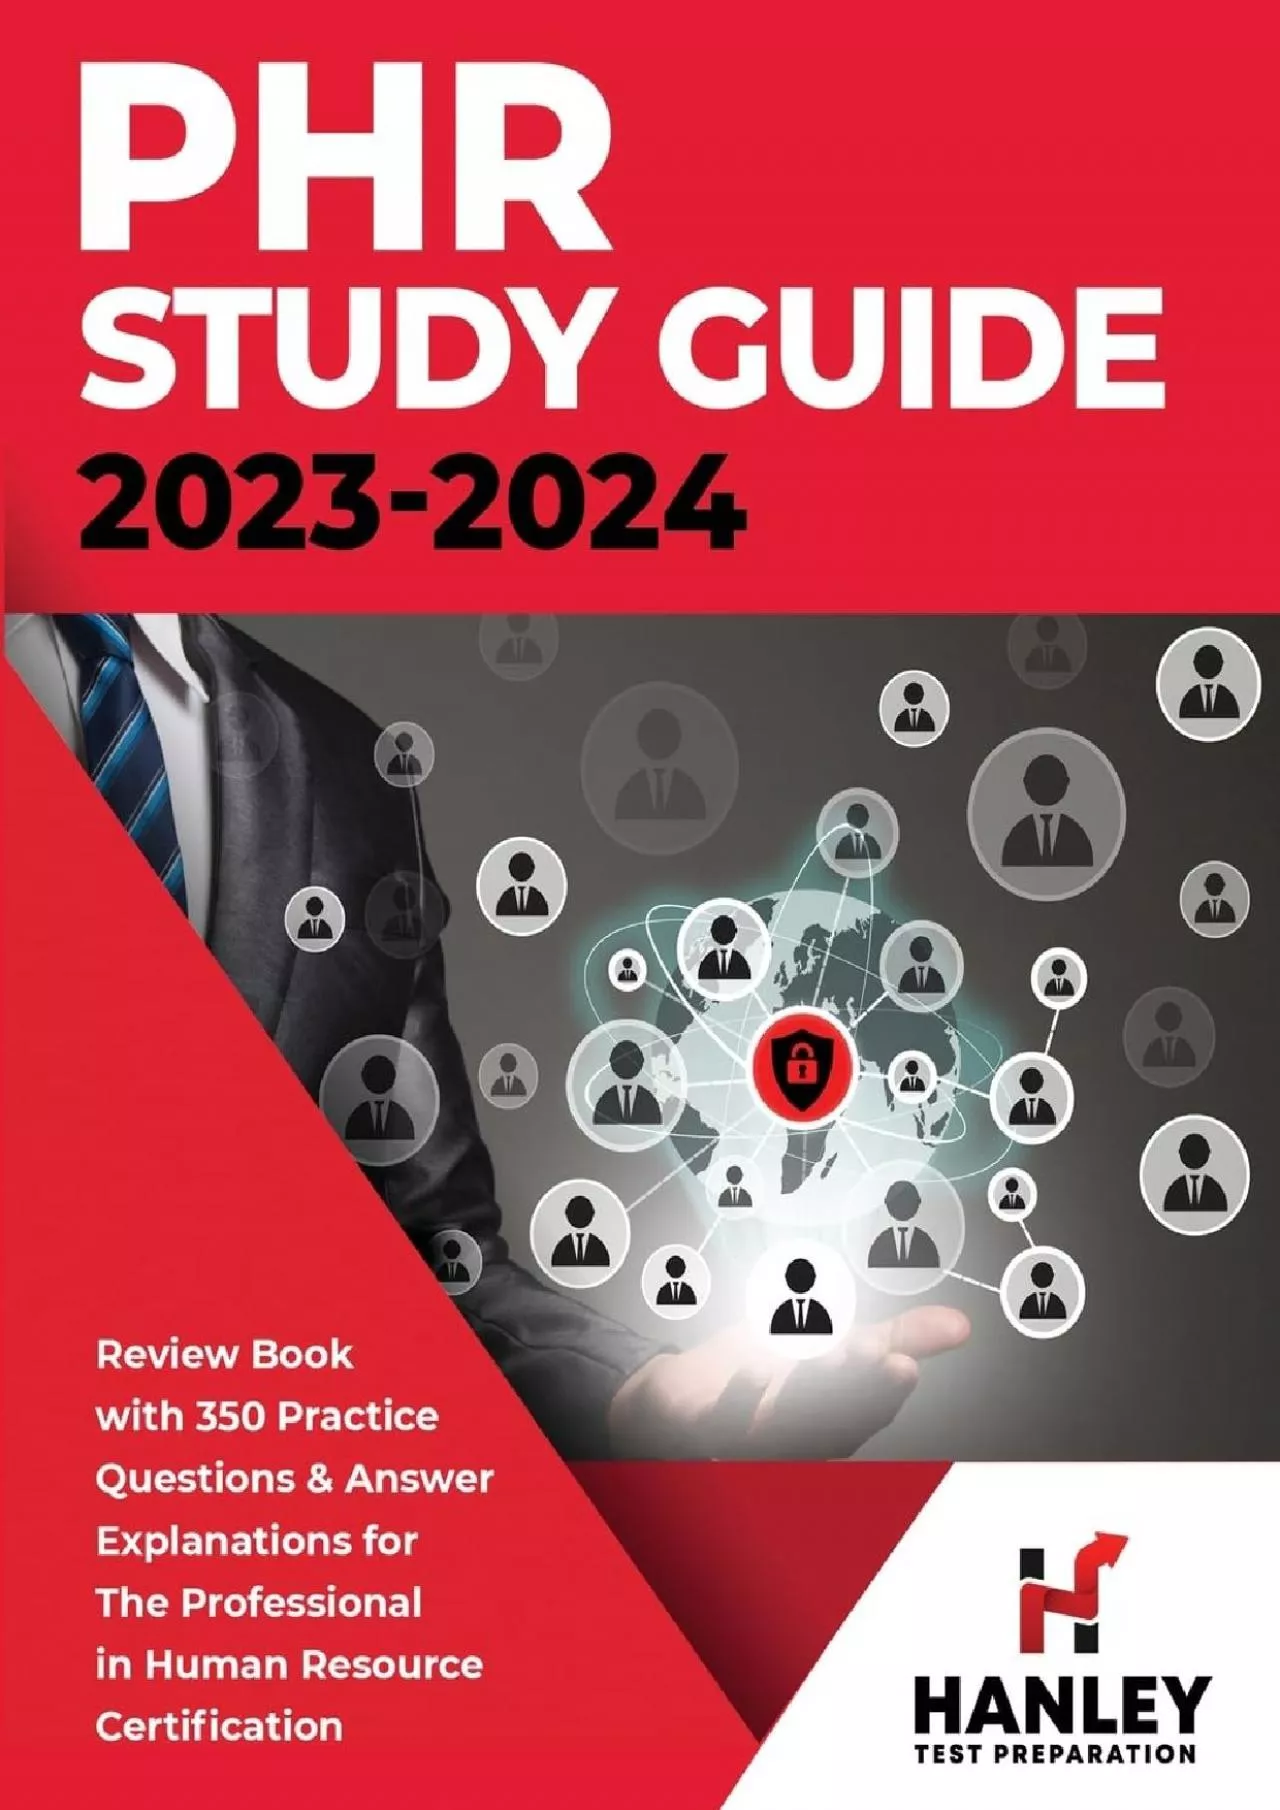 [DOWNLOAD] PHR Study Guide 2023-2024: Review Book With 350 Practice Questions and Answer